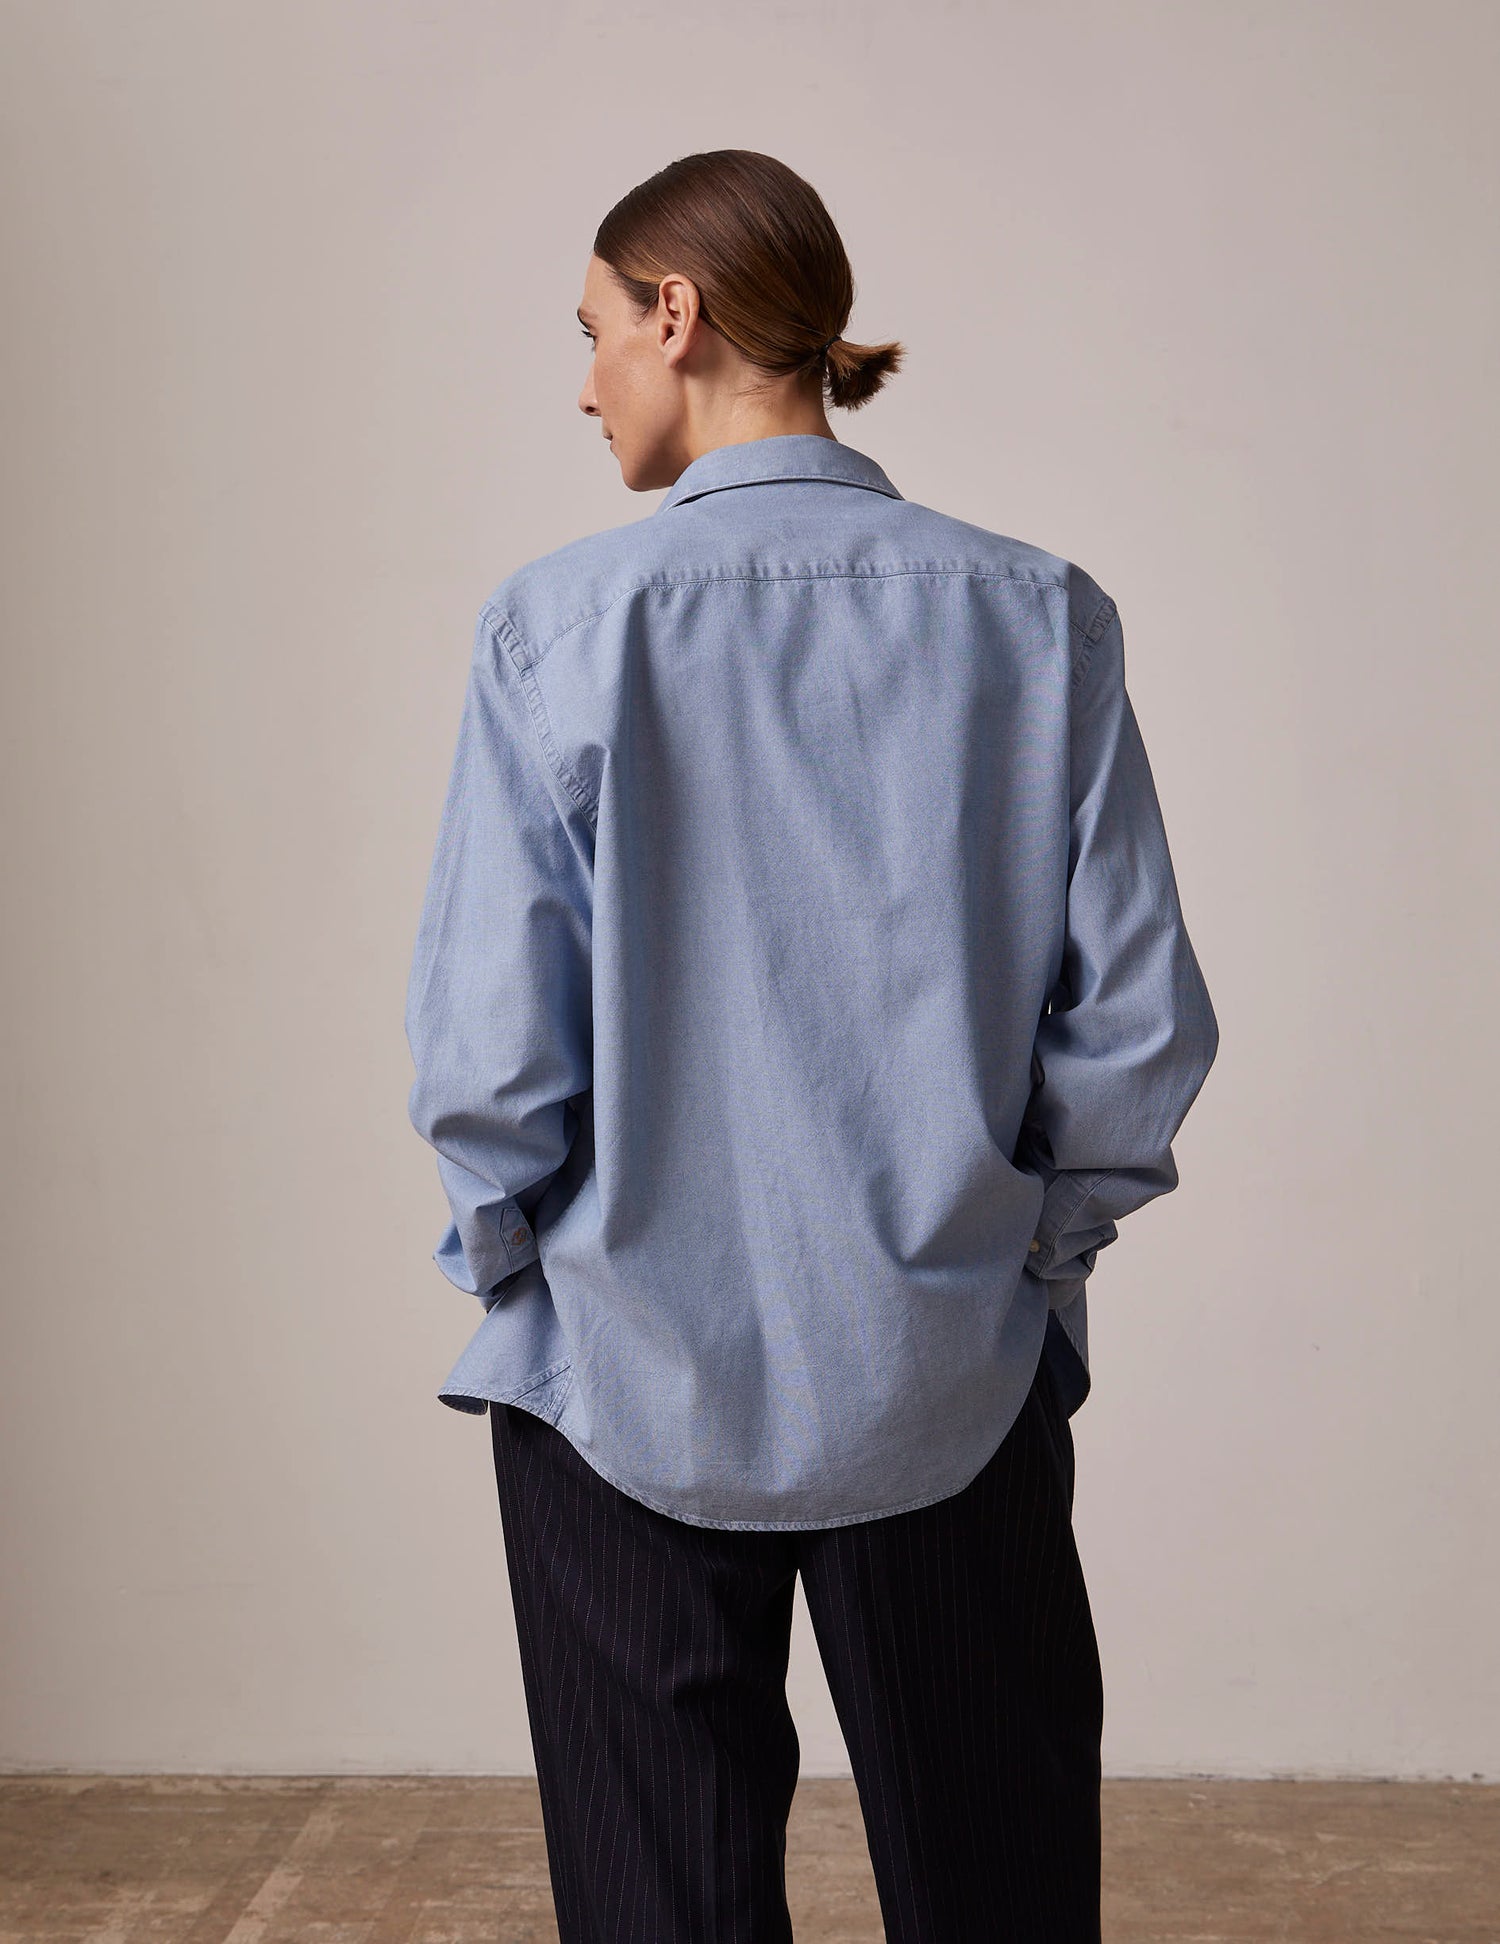 Chemise mixte "Je t'aime" bleu clair - Chambray - Col Figaret#6